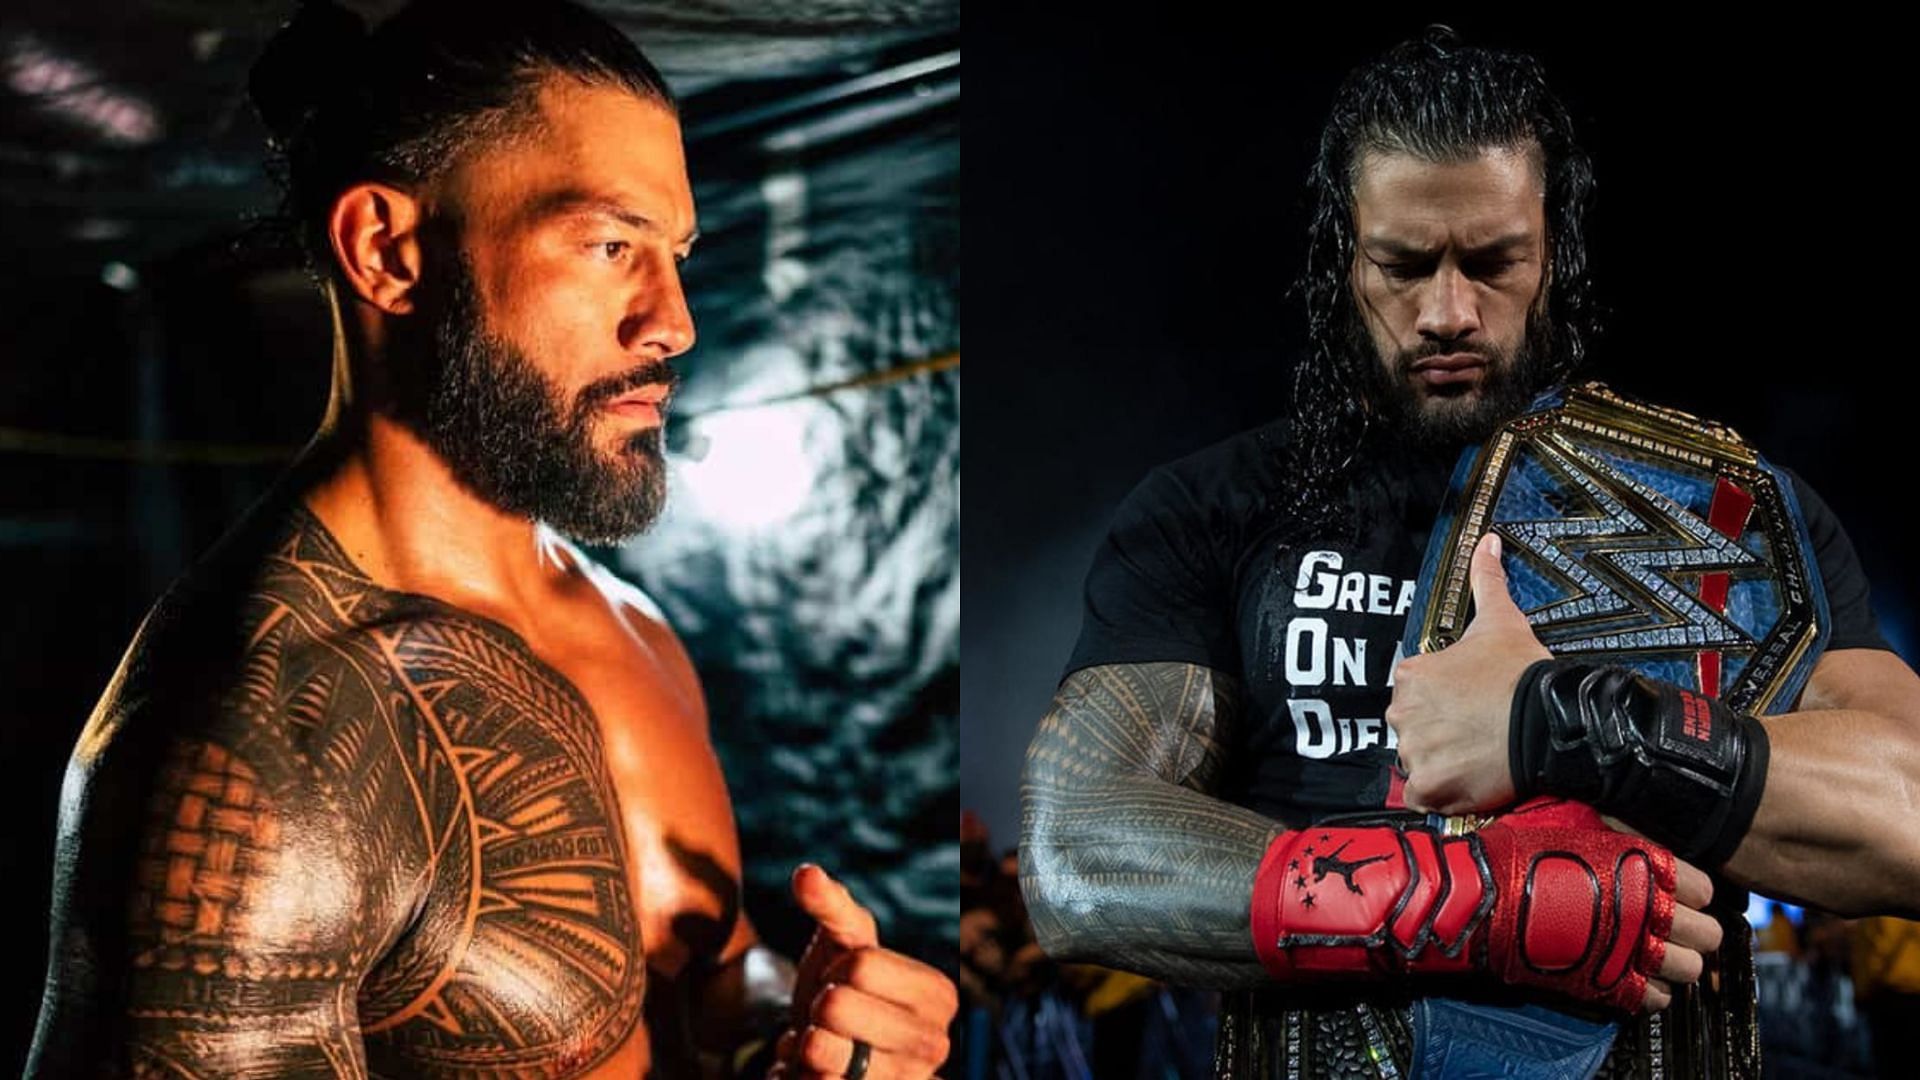 Reigns is set to return to SmackDown this week.